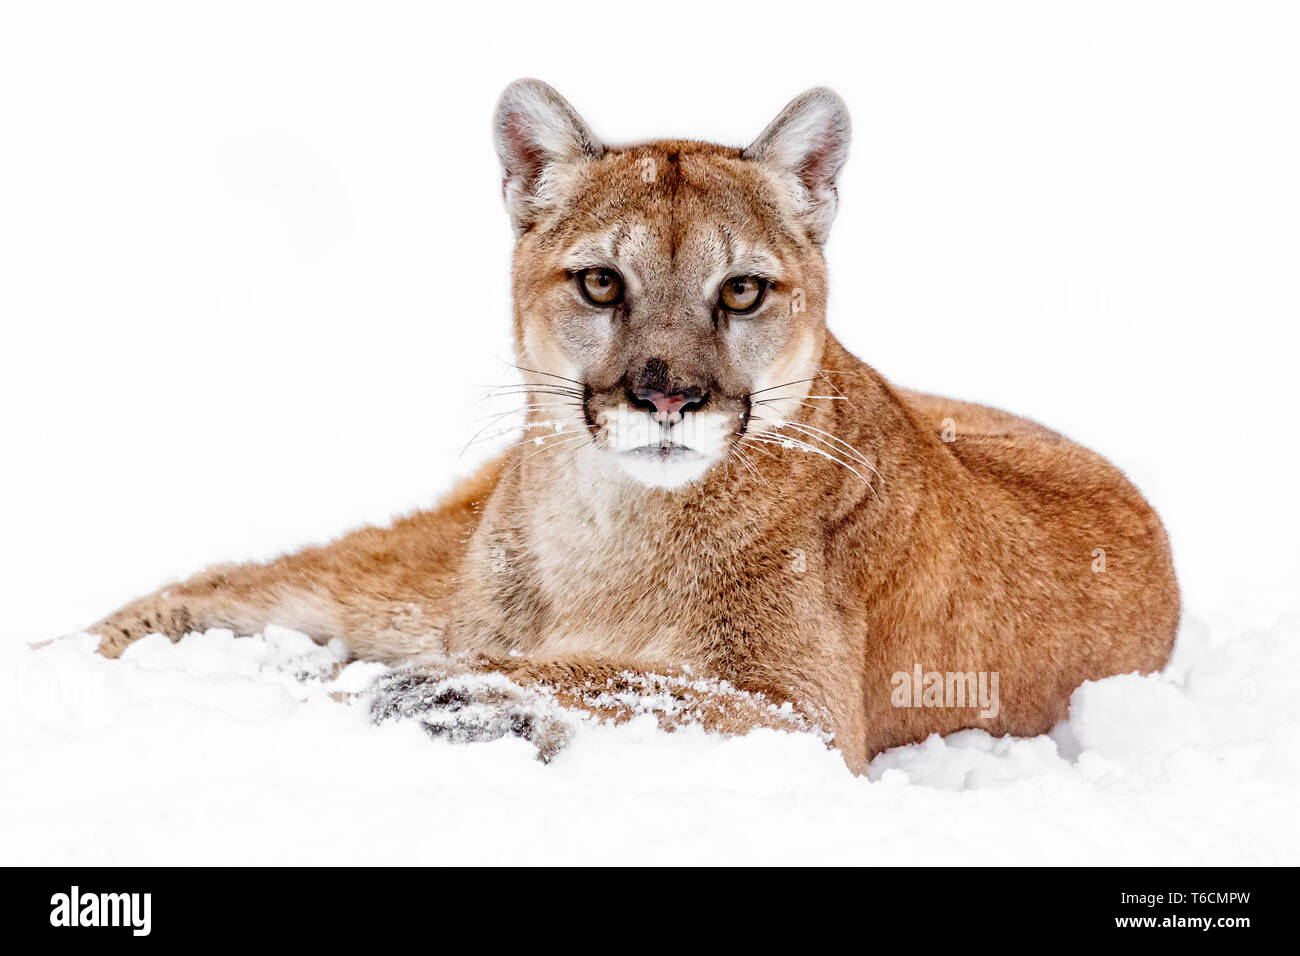 Mountain lion Cut Out Stock Images & Pictures - Alamy